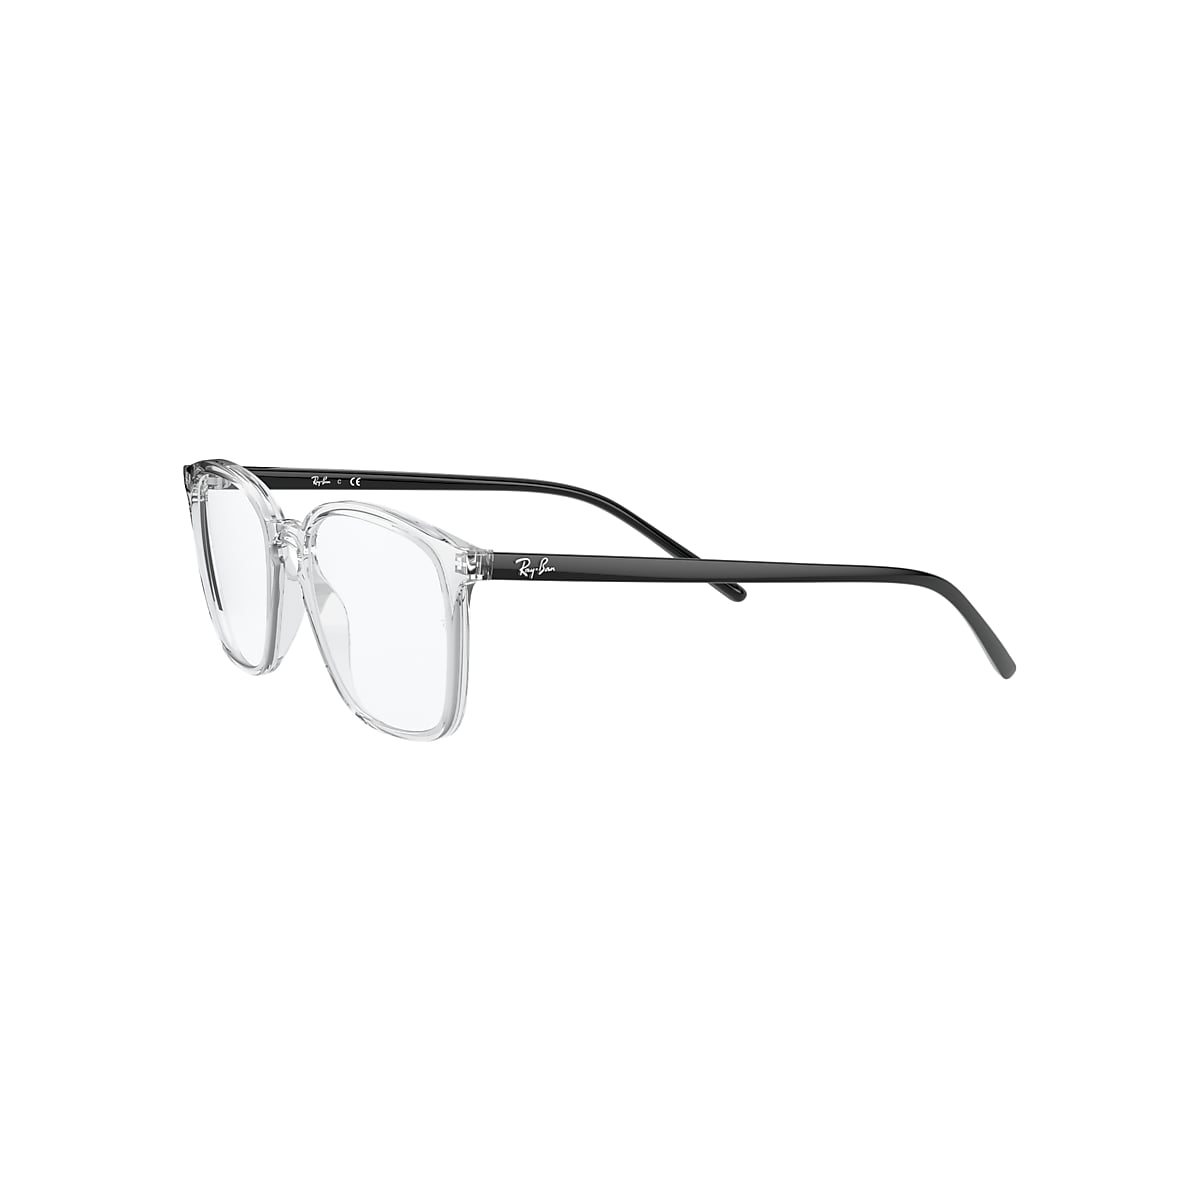 RB7185 Eyeglasses with Transparent Frame - RB7185 | Ray-Ban® US